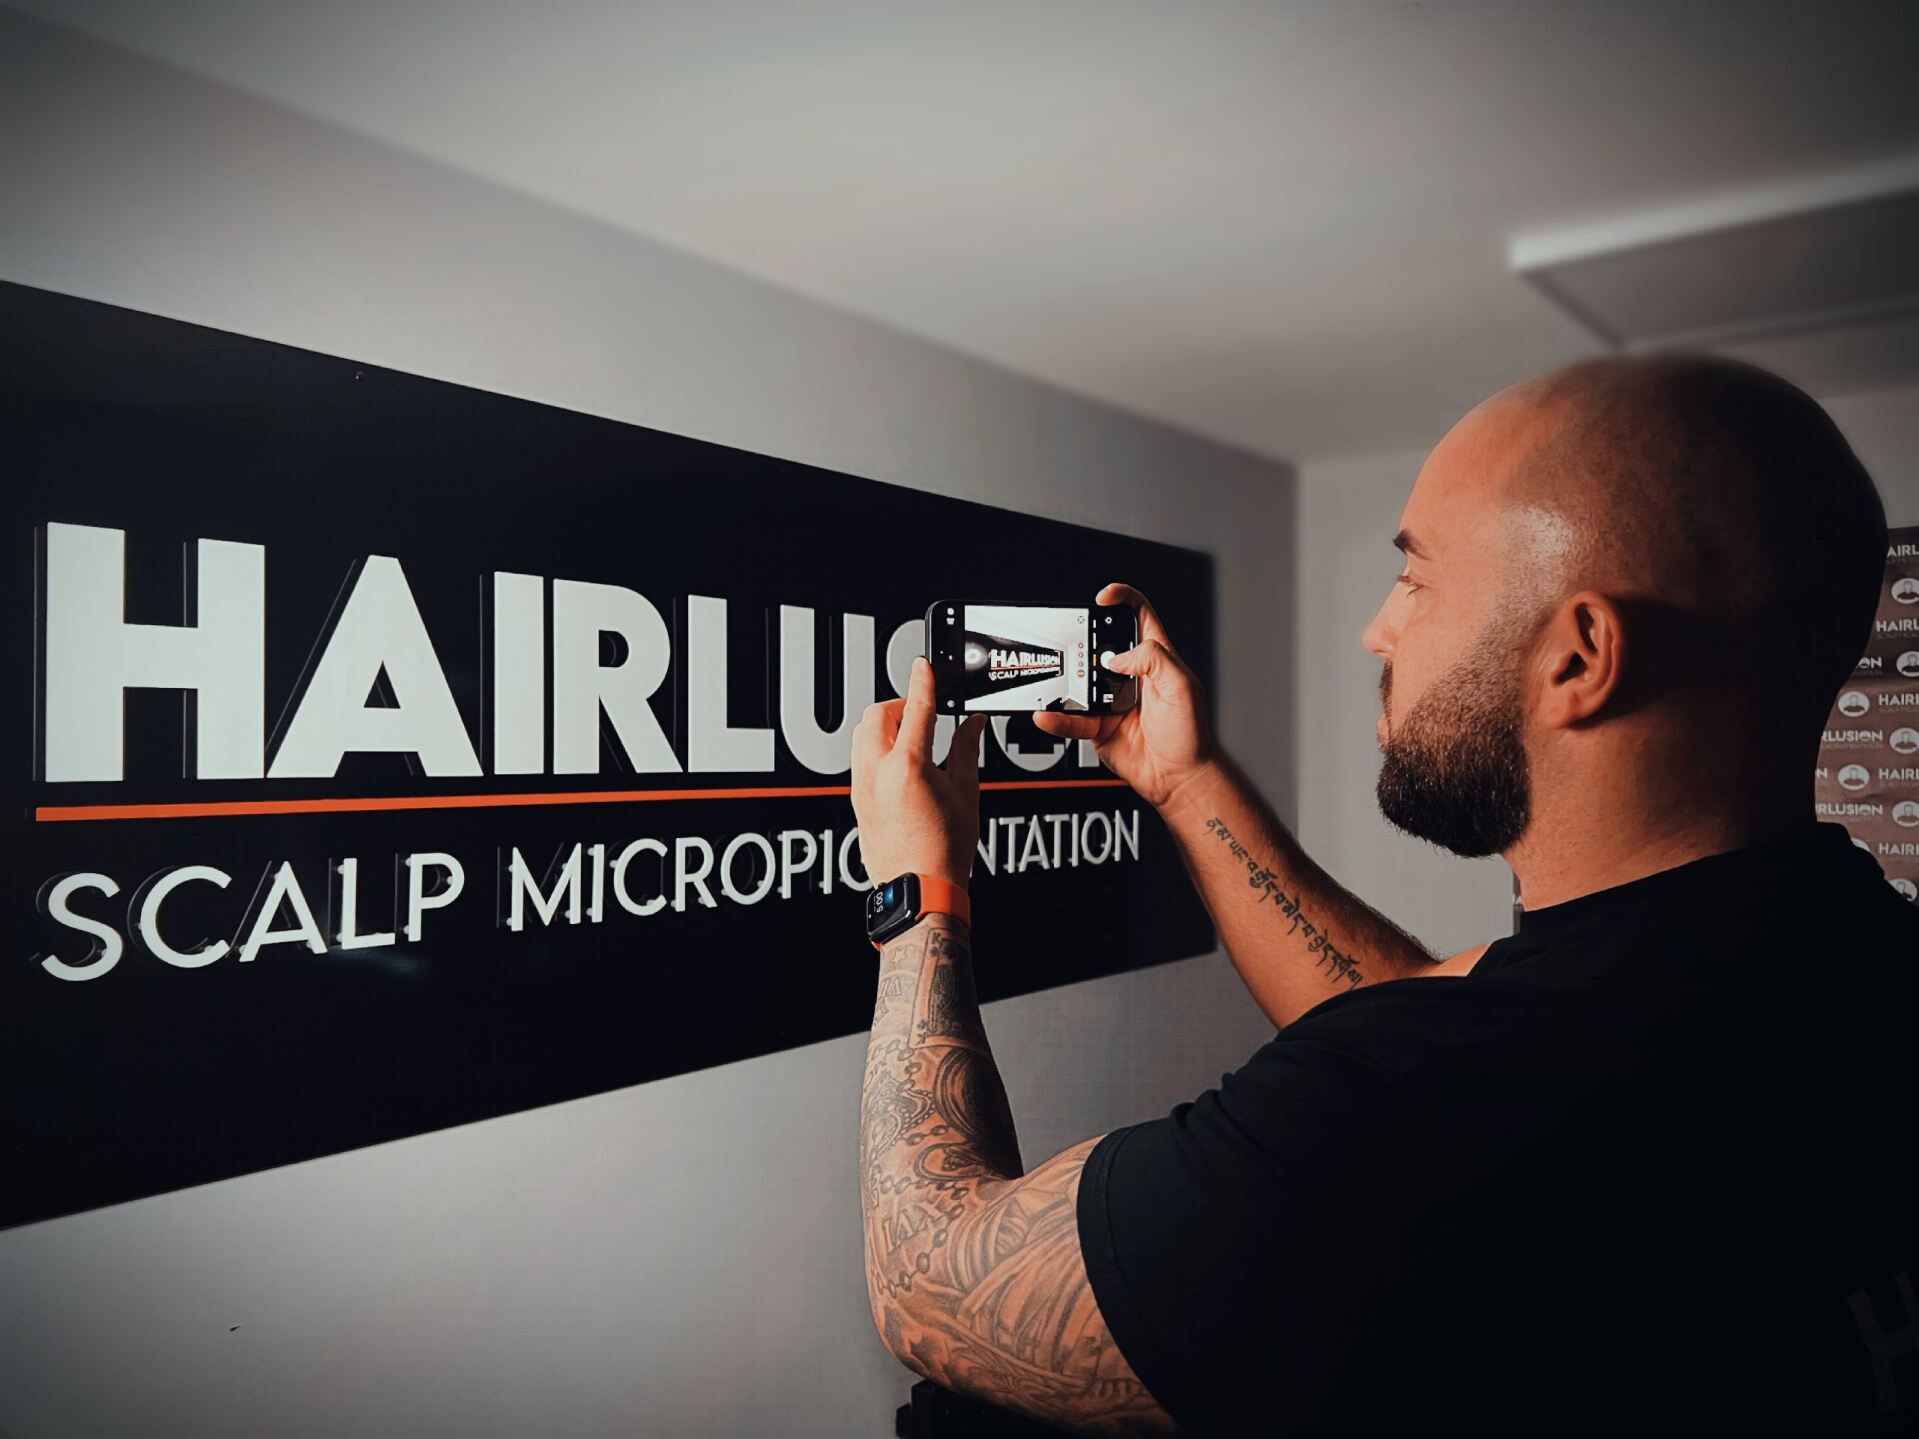 Joe taking a photo of the Hairlusion sign